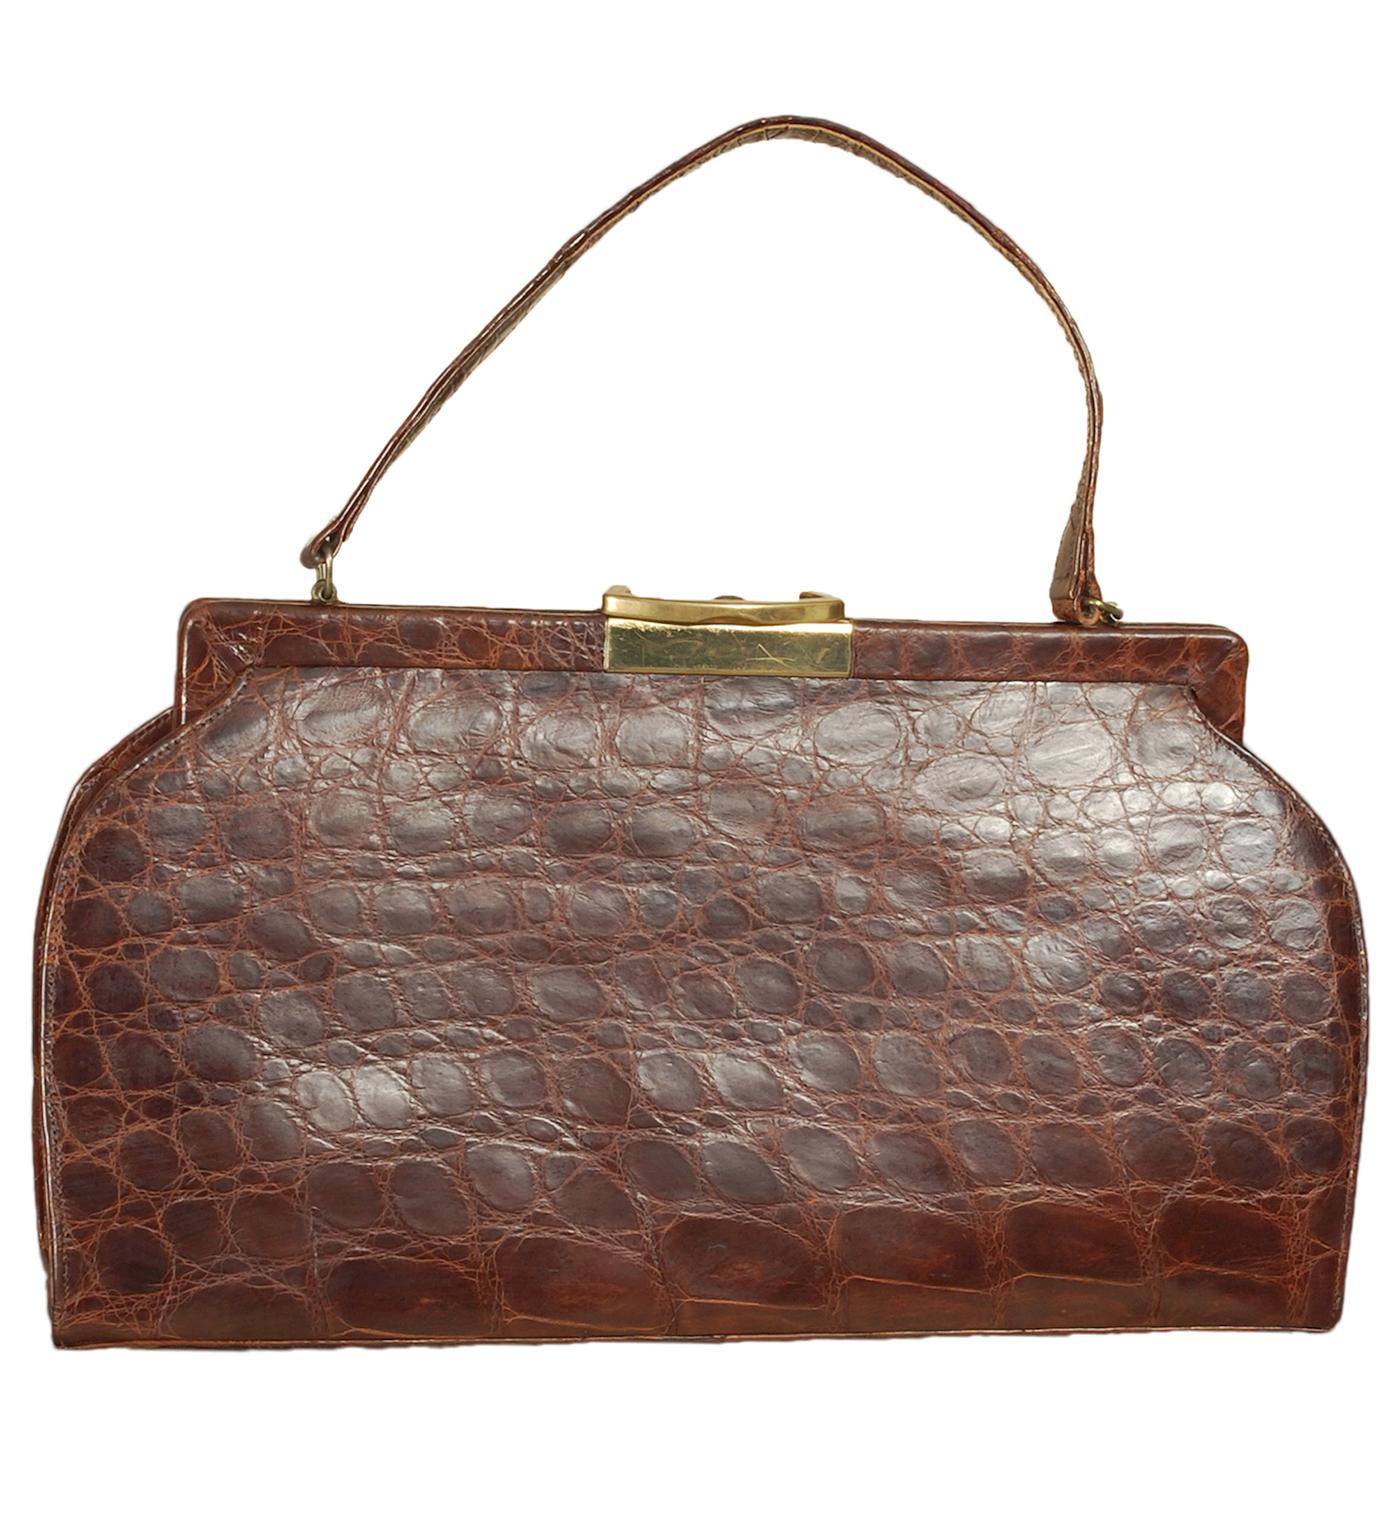 A ladylike staple accessory and a sign of good breeding, an alligator top handle bag remains as relevant today as it was a half-century ago. Pairs as effortlessly with denim and a trench as it does with a cocktail dress. This one has the very modern